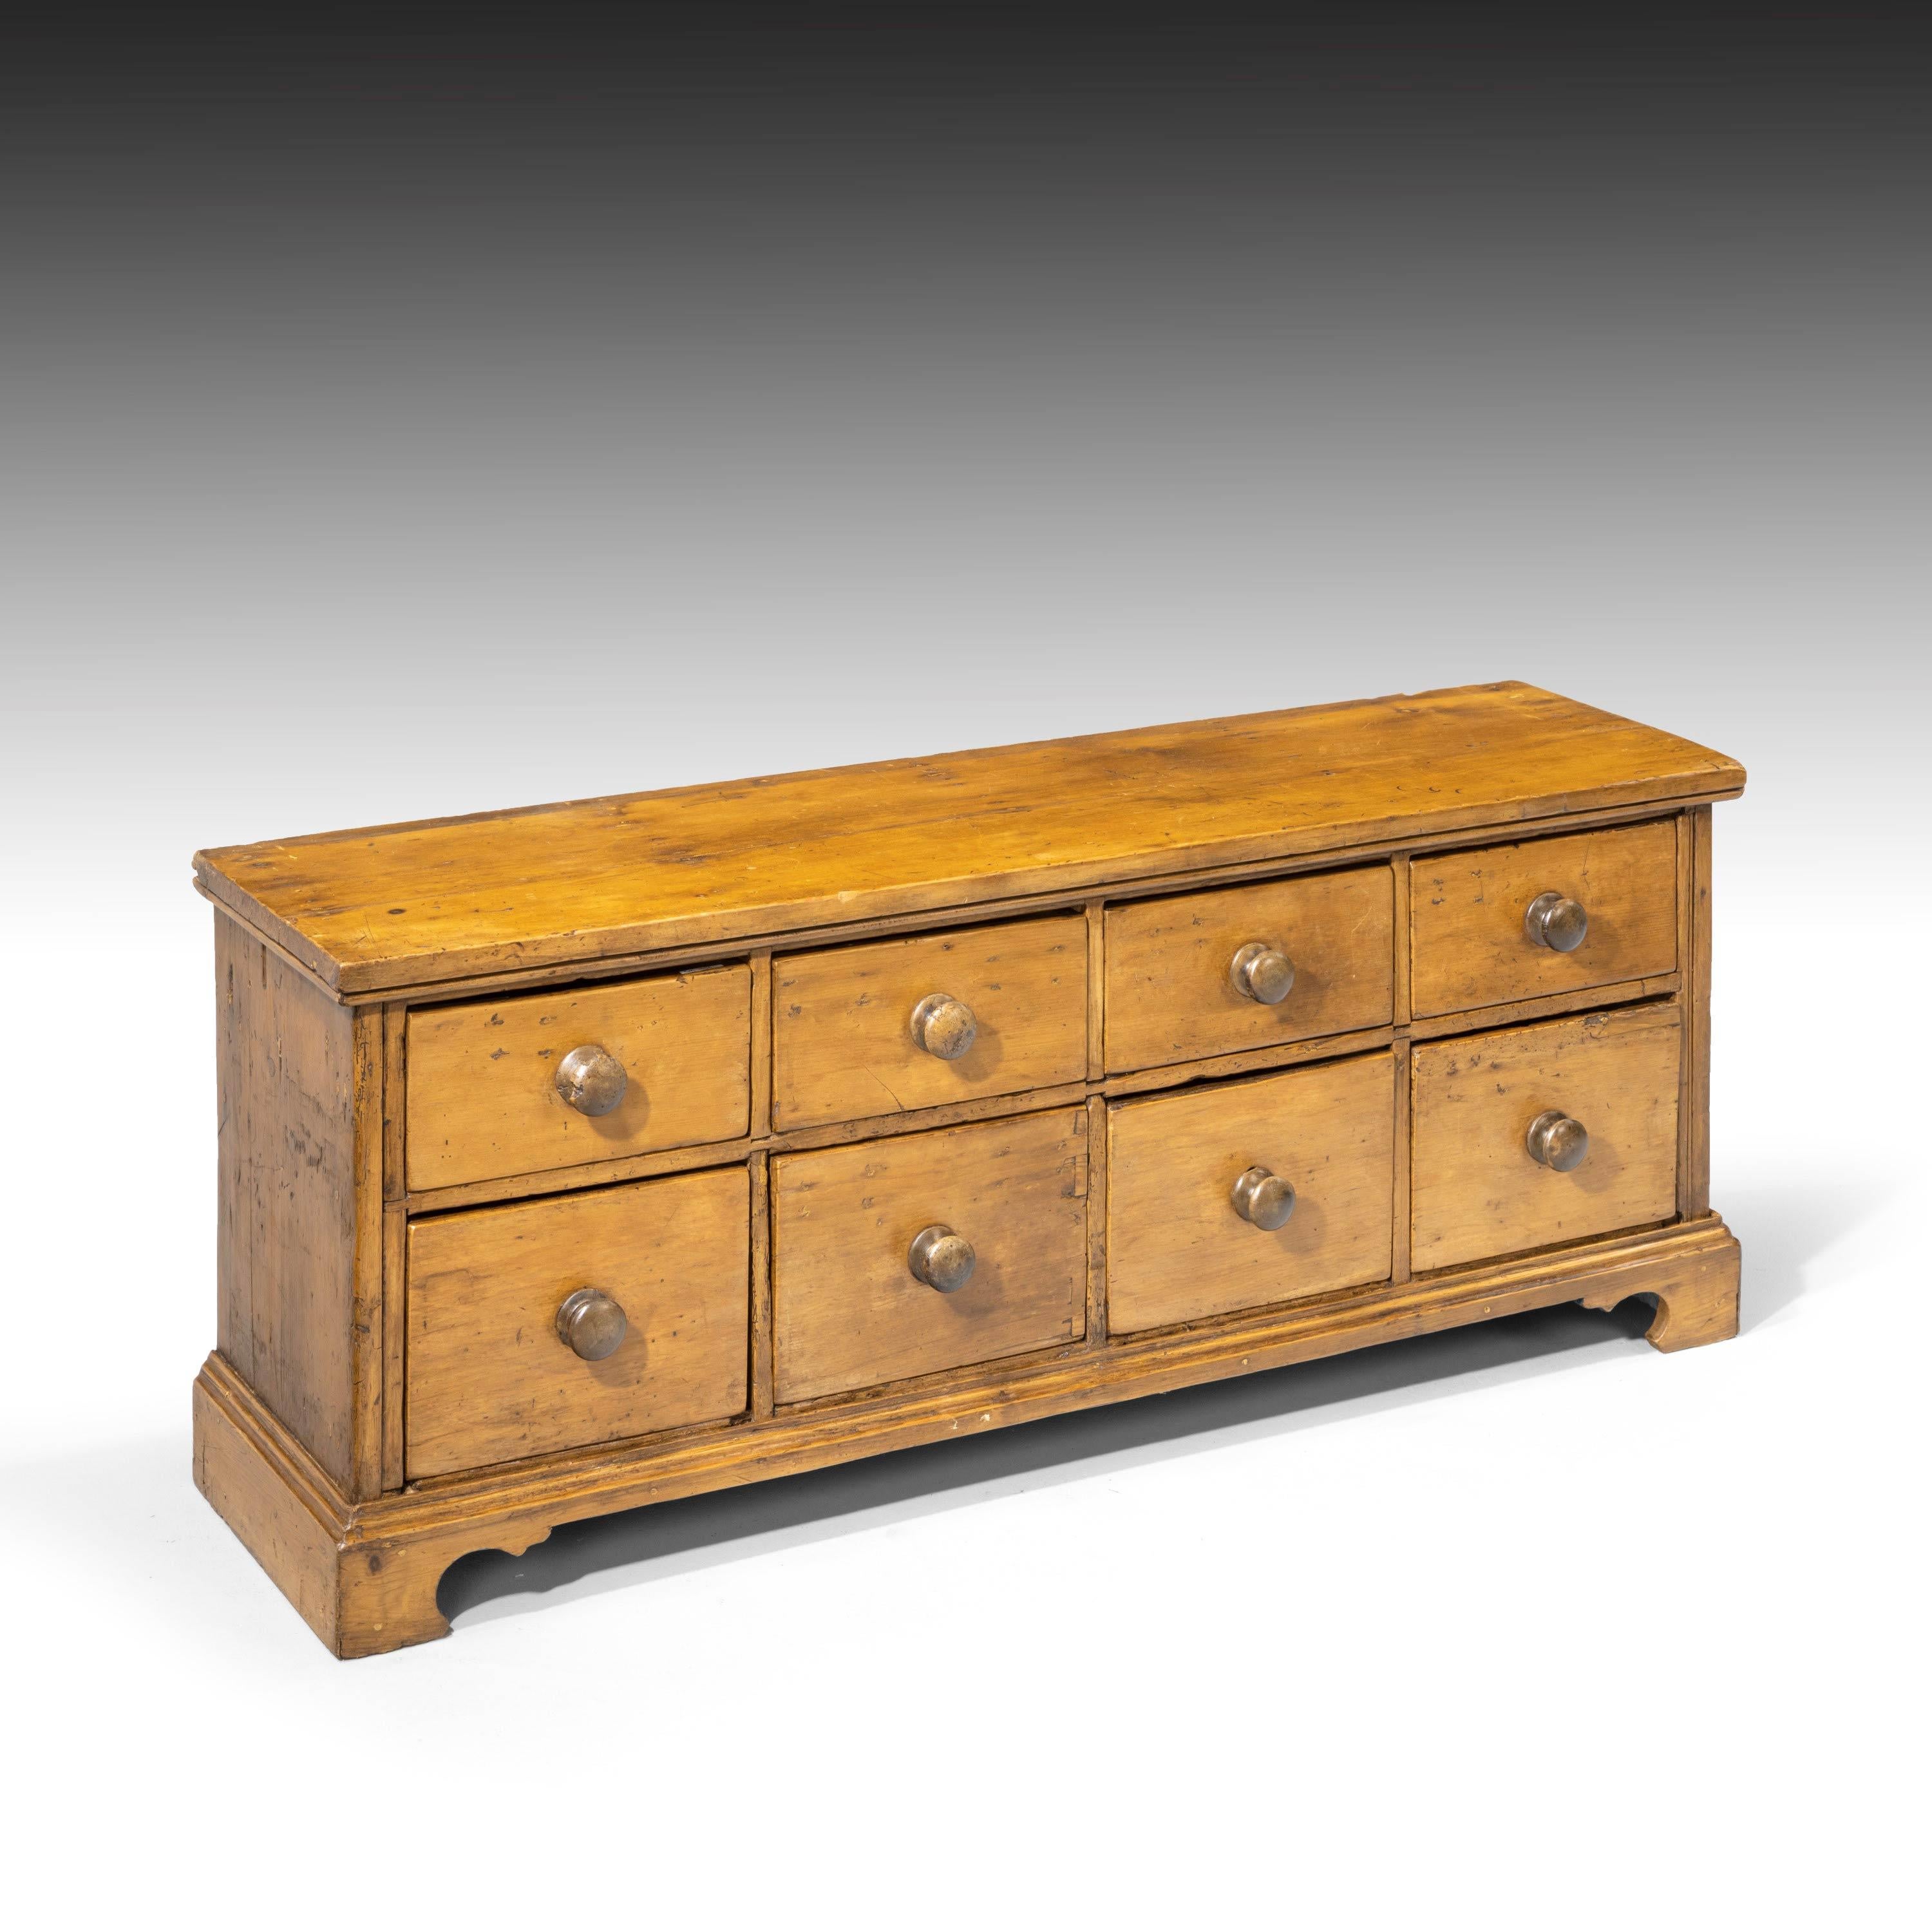 Most Unusual Early 19th Century Pine Chest of Drawers 1